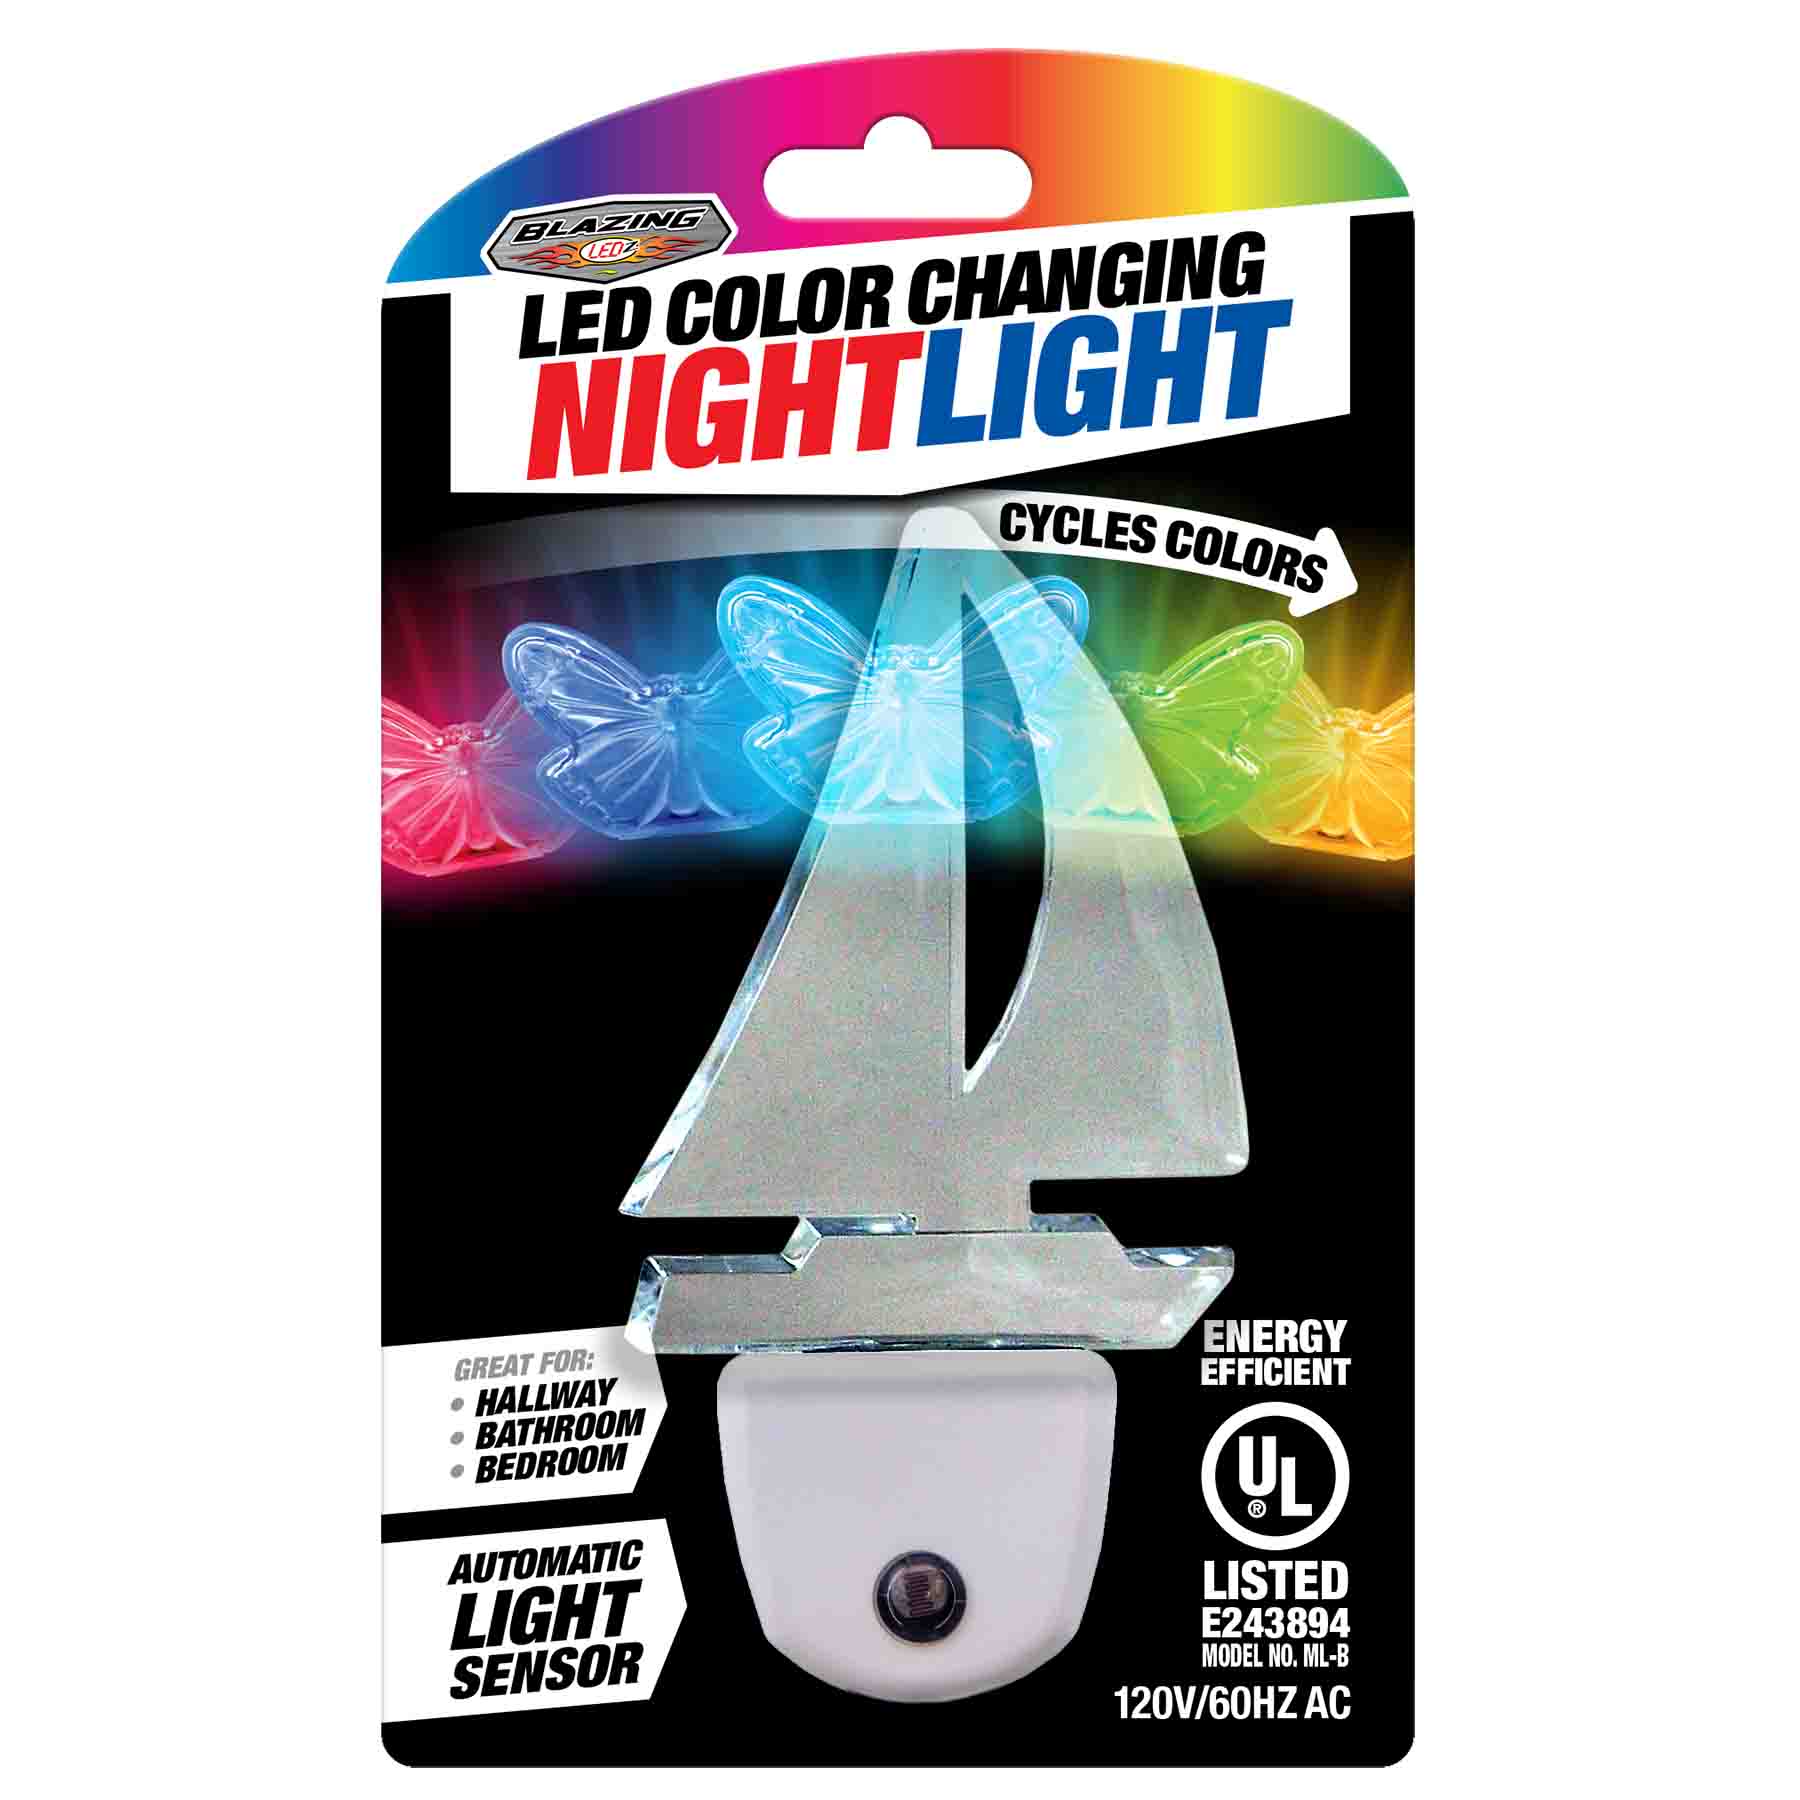 Motion Sensor Activated LED Lamp, Fun 8 Colors Changing Bathroom Nightlight  NEW